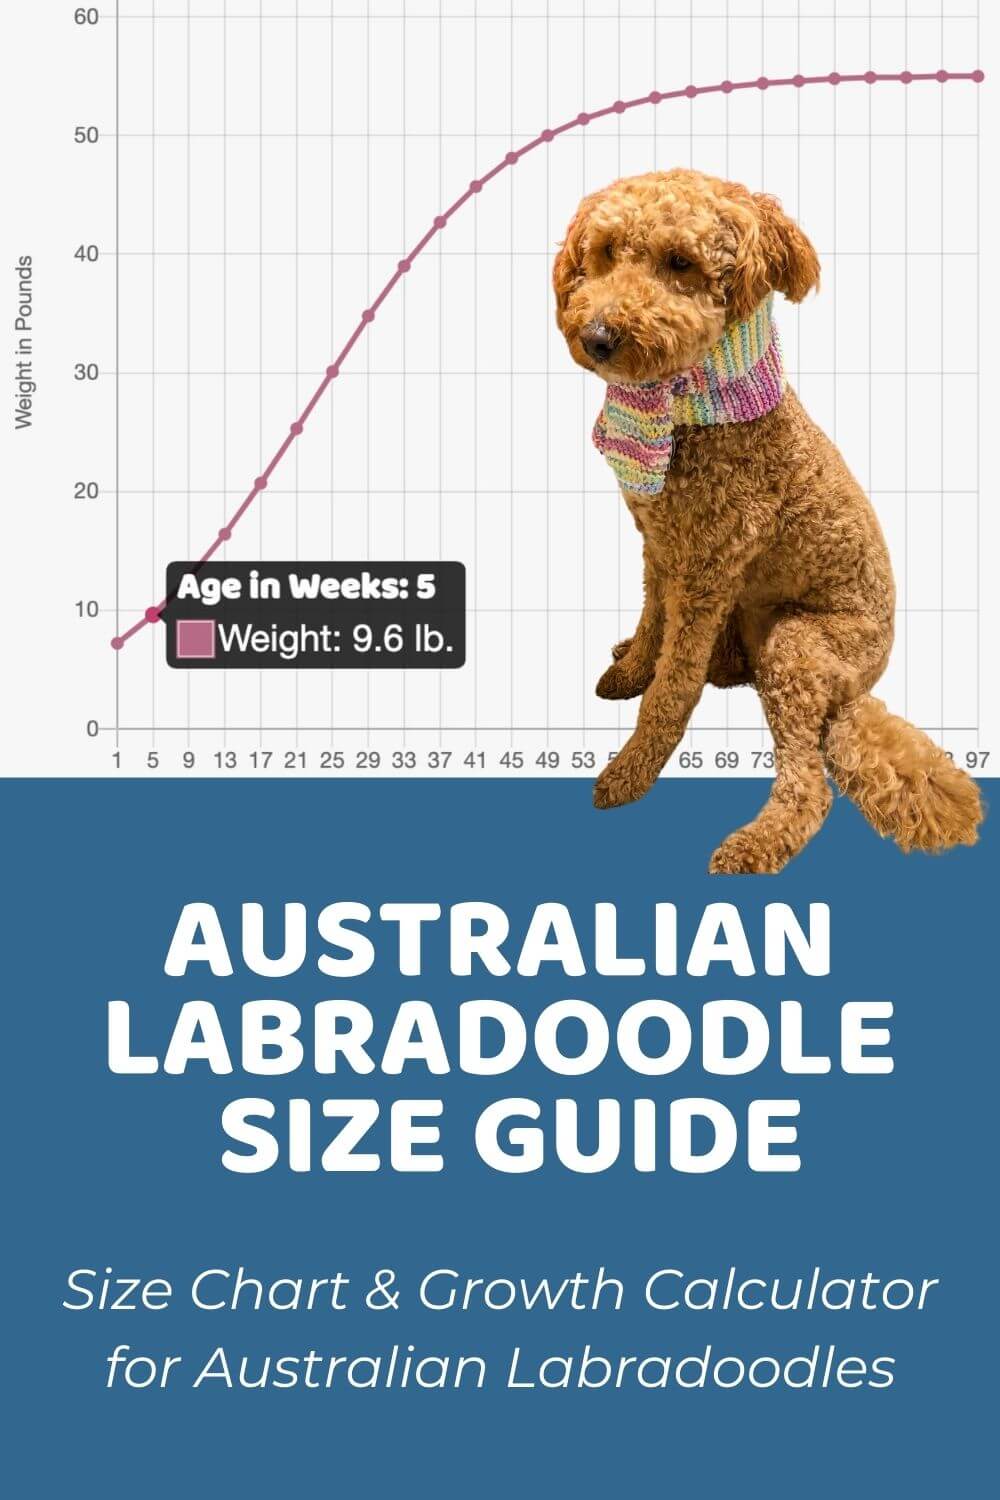 Australian Labradoodle Size Chart, Growth Patterns & Growth Calculator